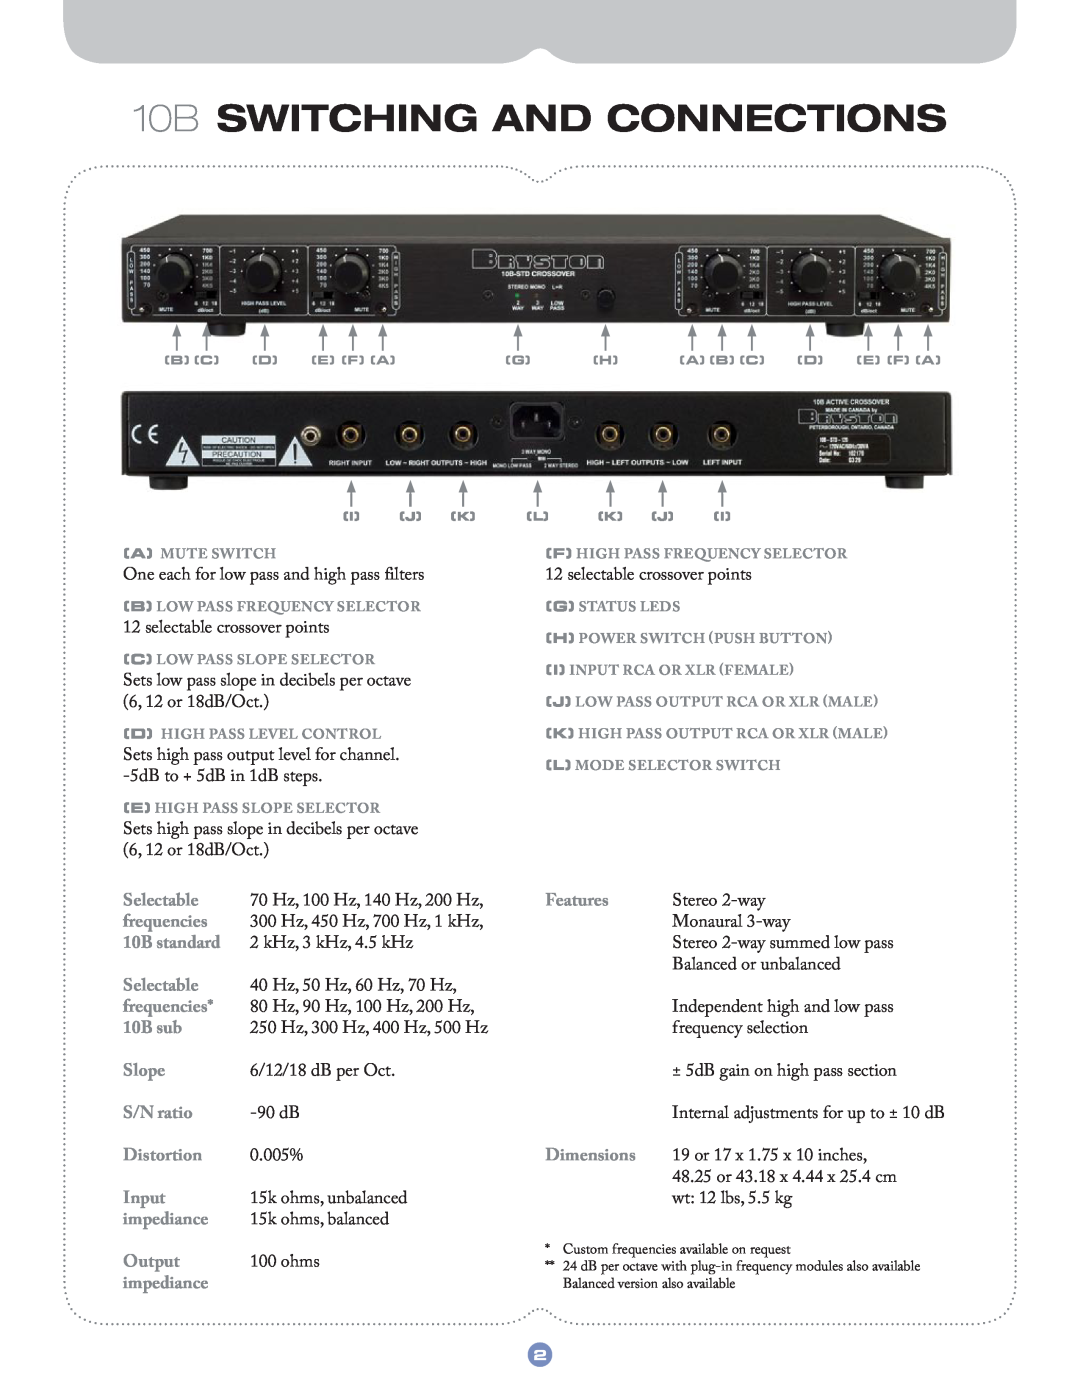 Bryston 10B LR manual 10B SWITCHING AND CONNECTIONS 